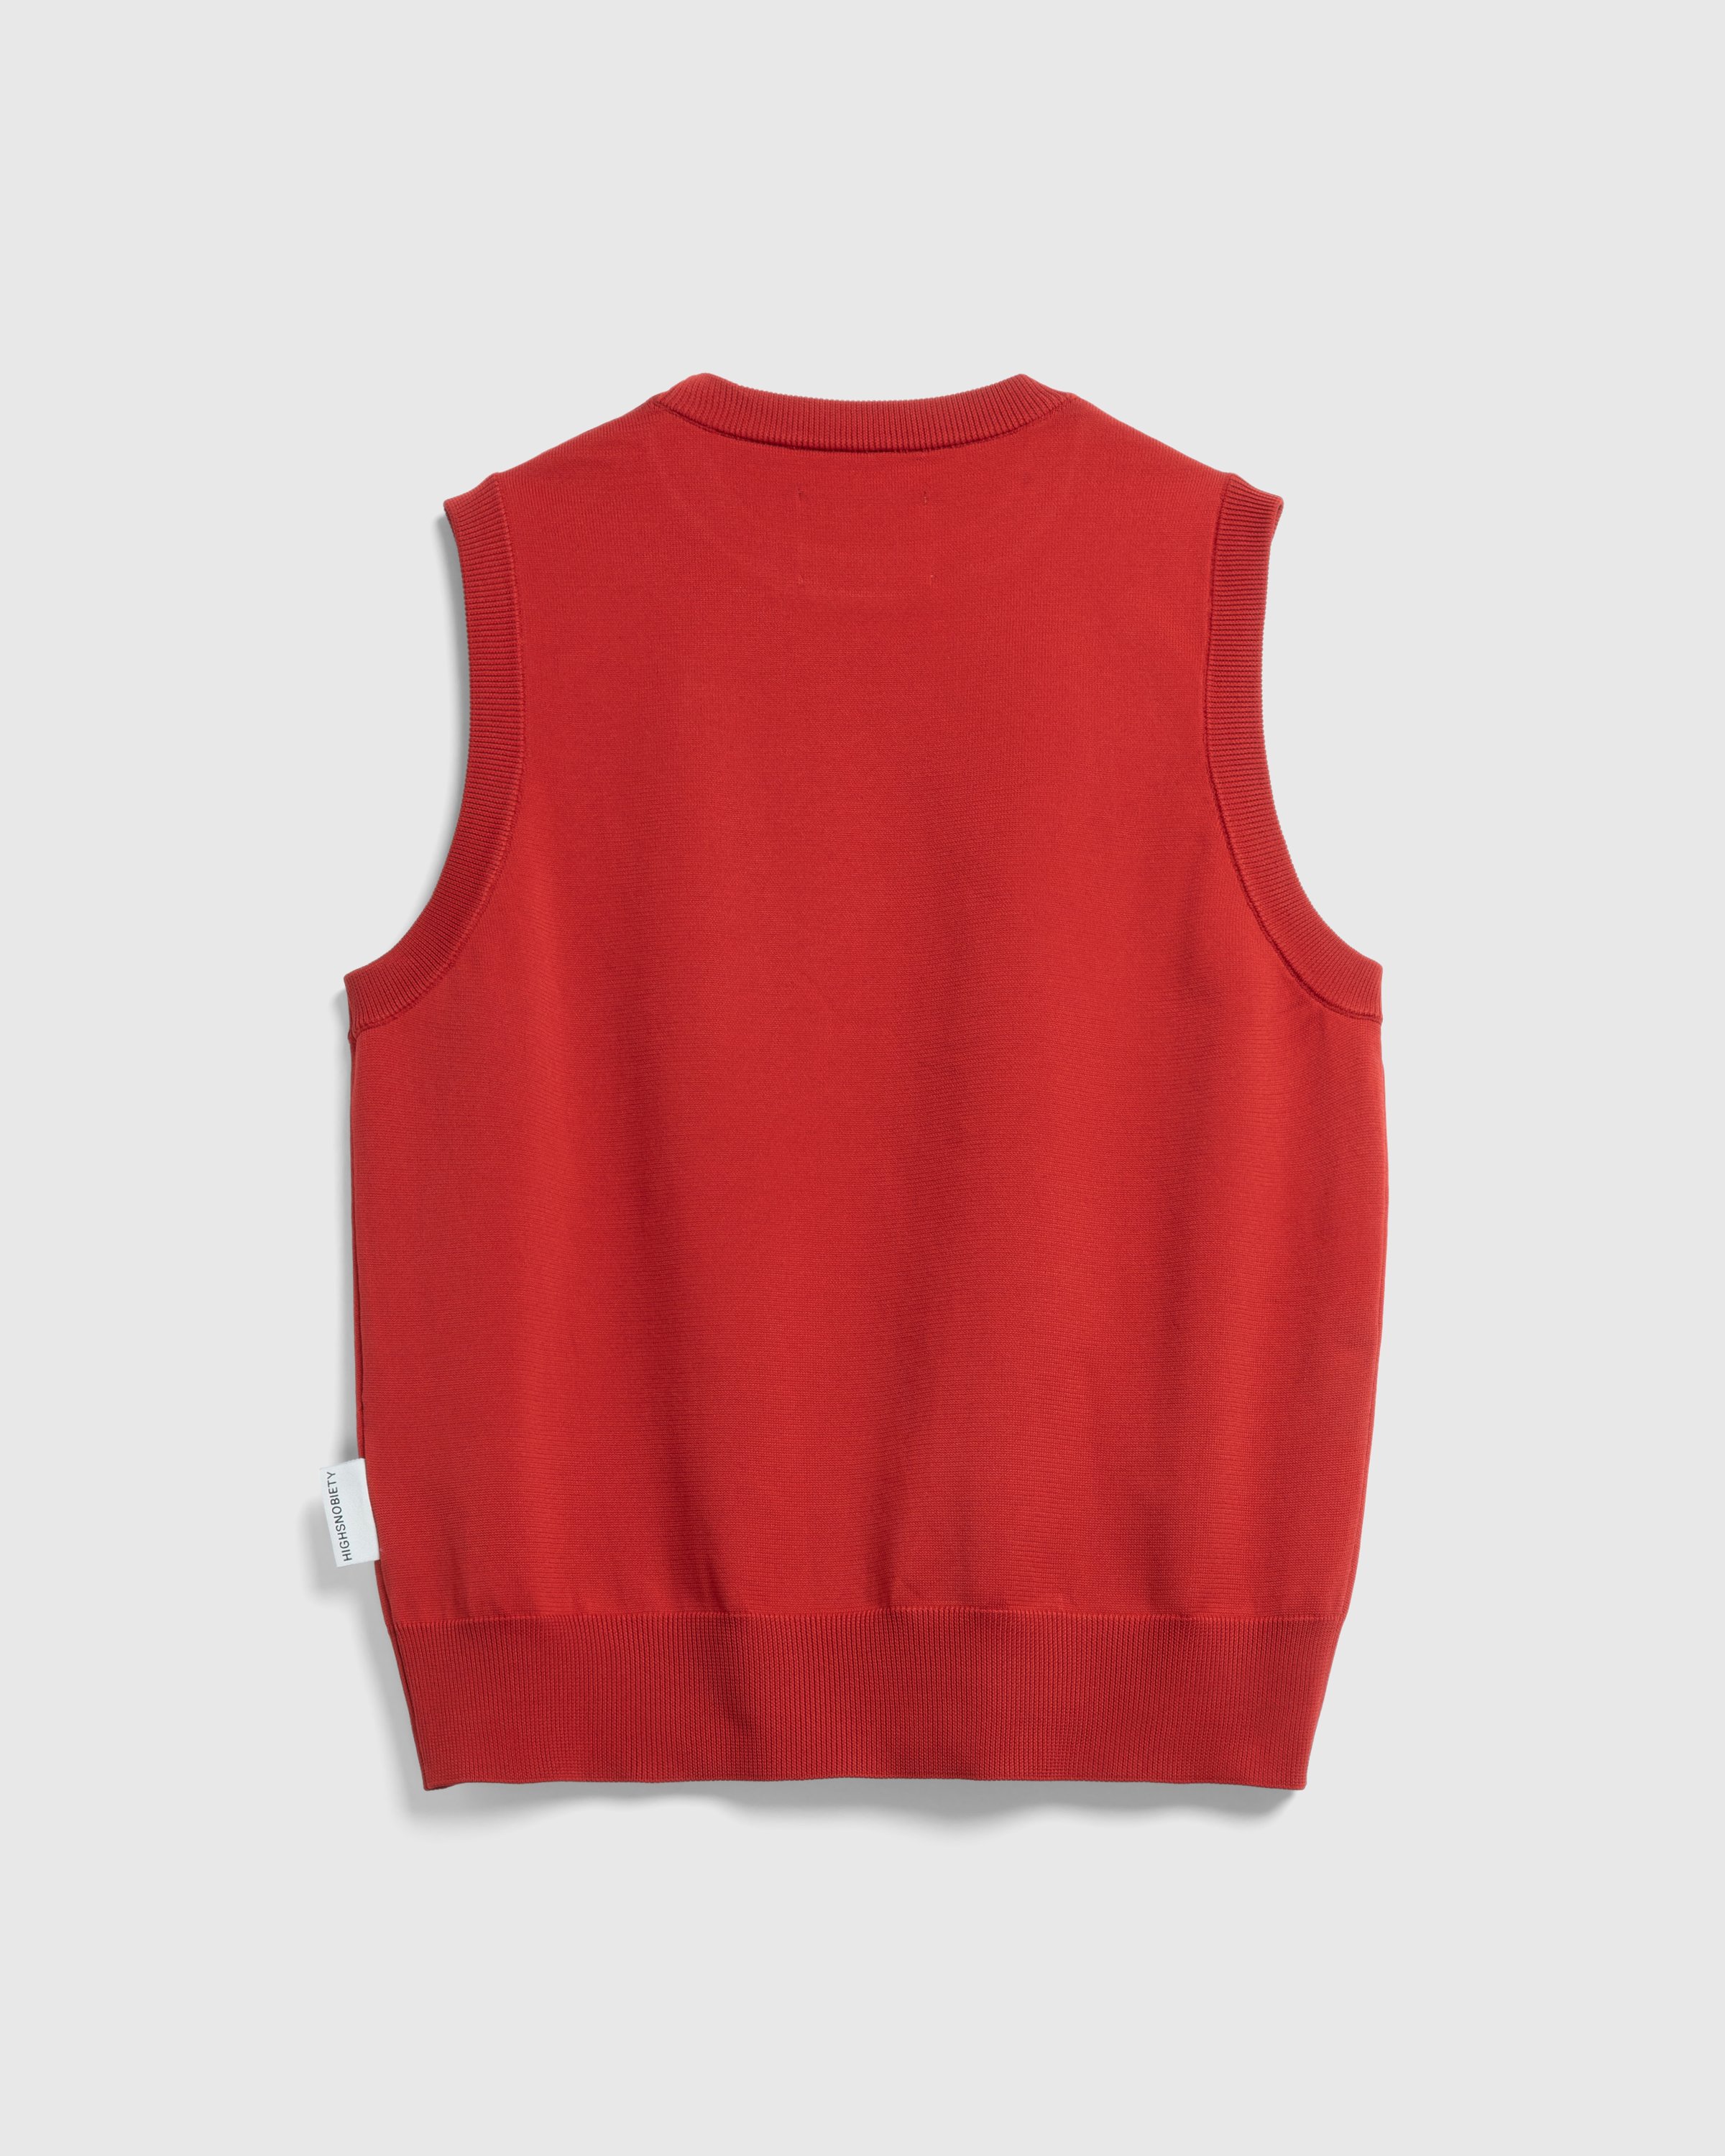 Highsnobiety HS05 - Poly Knit Tank Top Ruby Red - Clothing - Ruby Red - Image 2